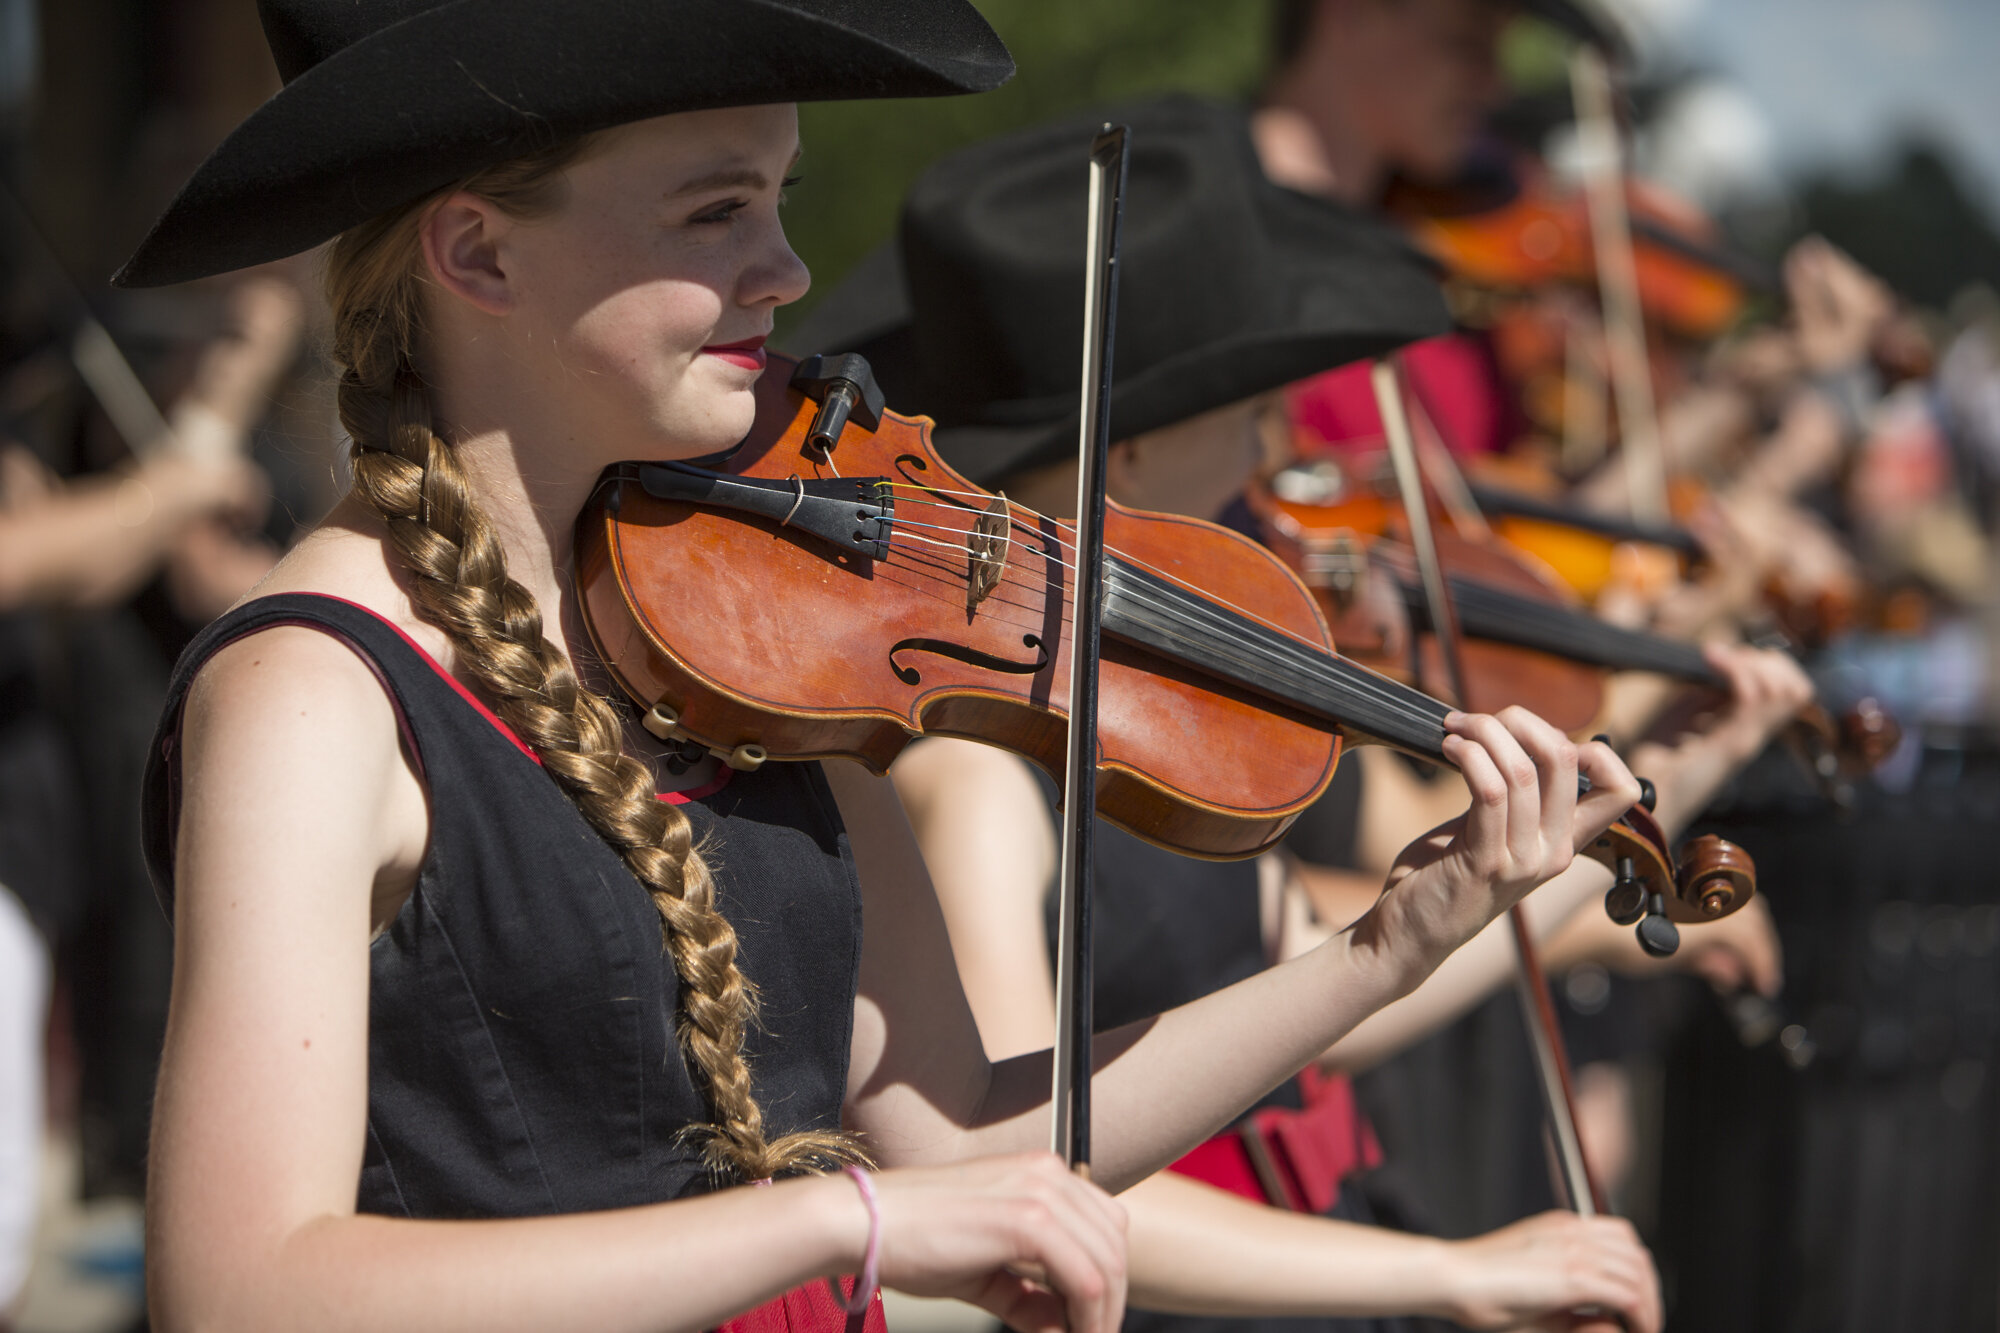 calgary event photography bliss photographic young girls playing violins cowboy hats.jpg